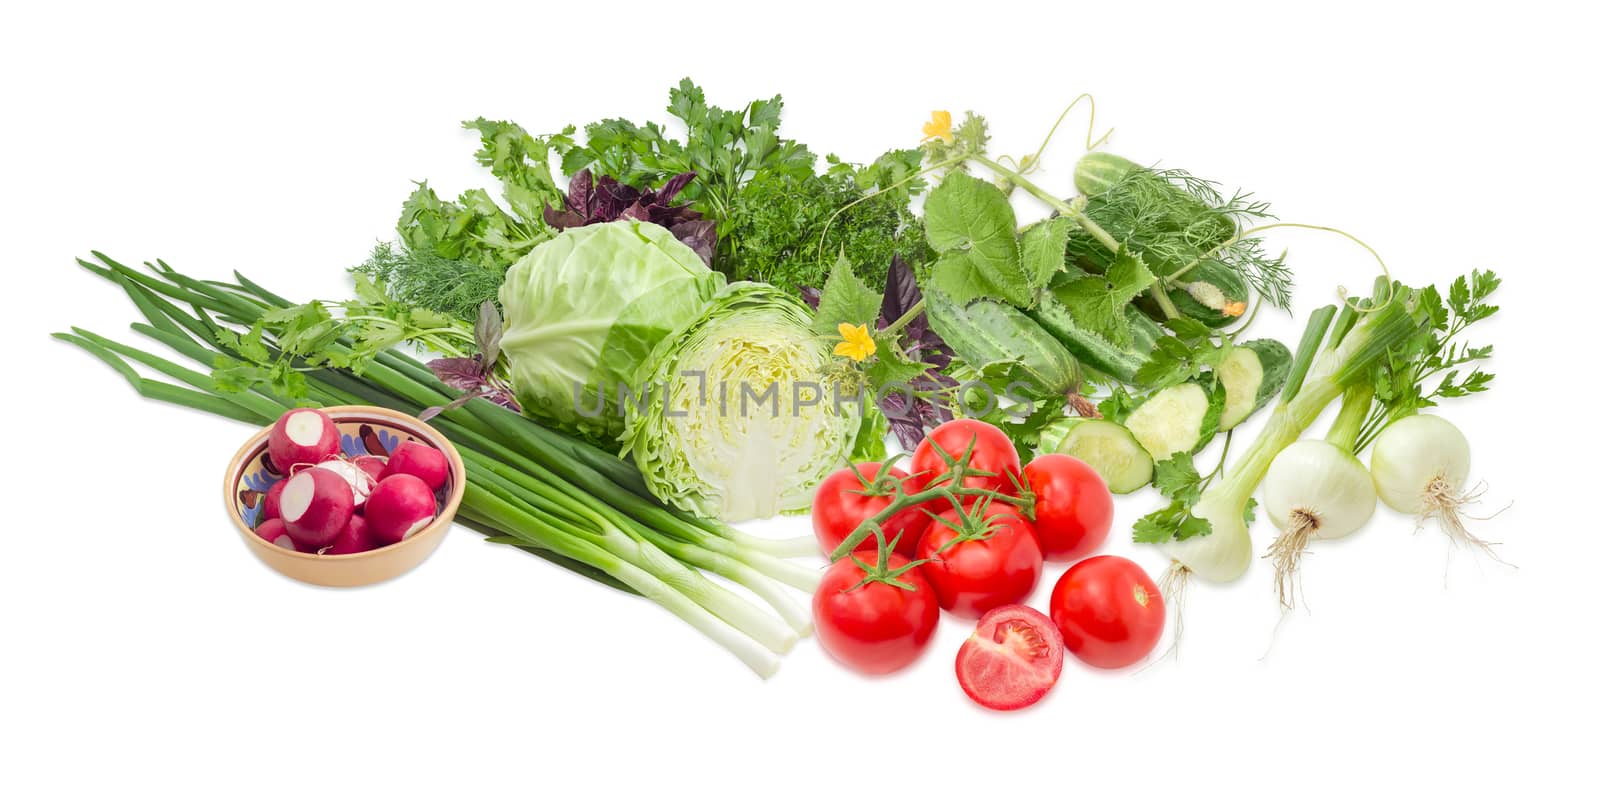 Pile of different early vegetables, like young white cabbage, tomatoes, onion bulbs, green onion, red radish, cucumbers and potherb, like parsley, dill, basil, cilantro on a light background
